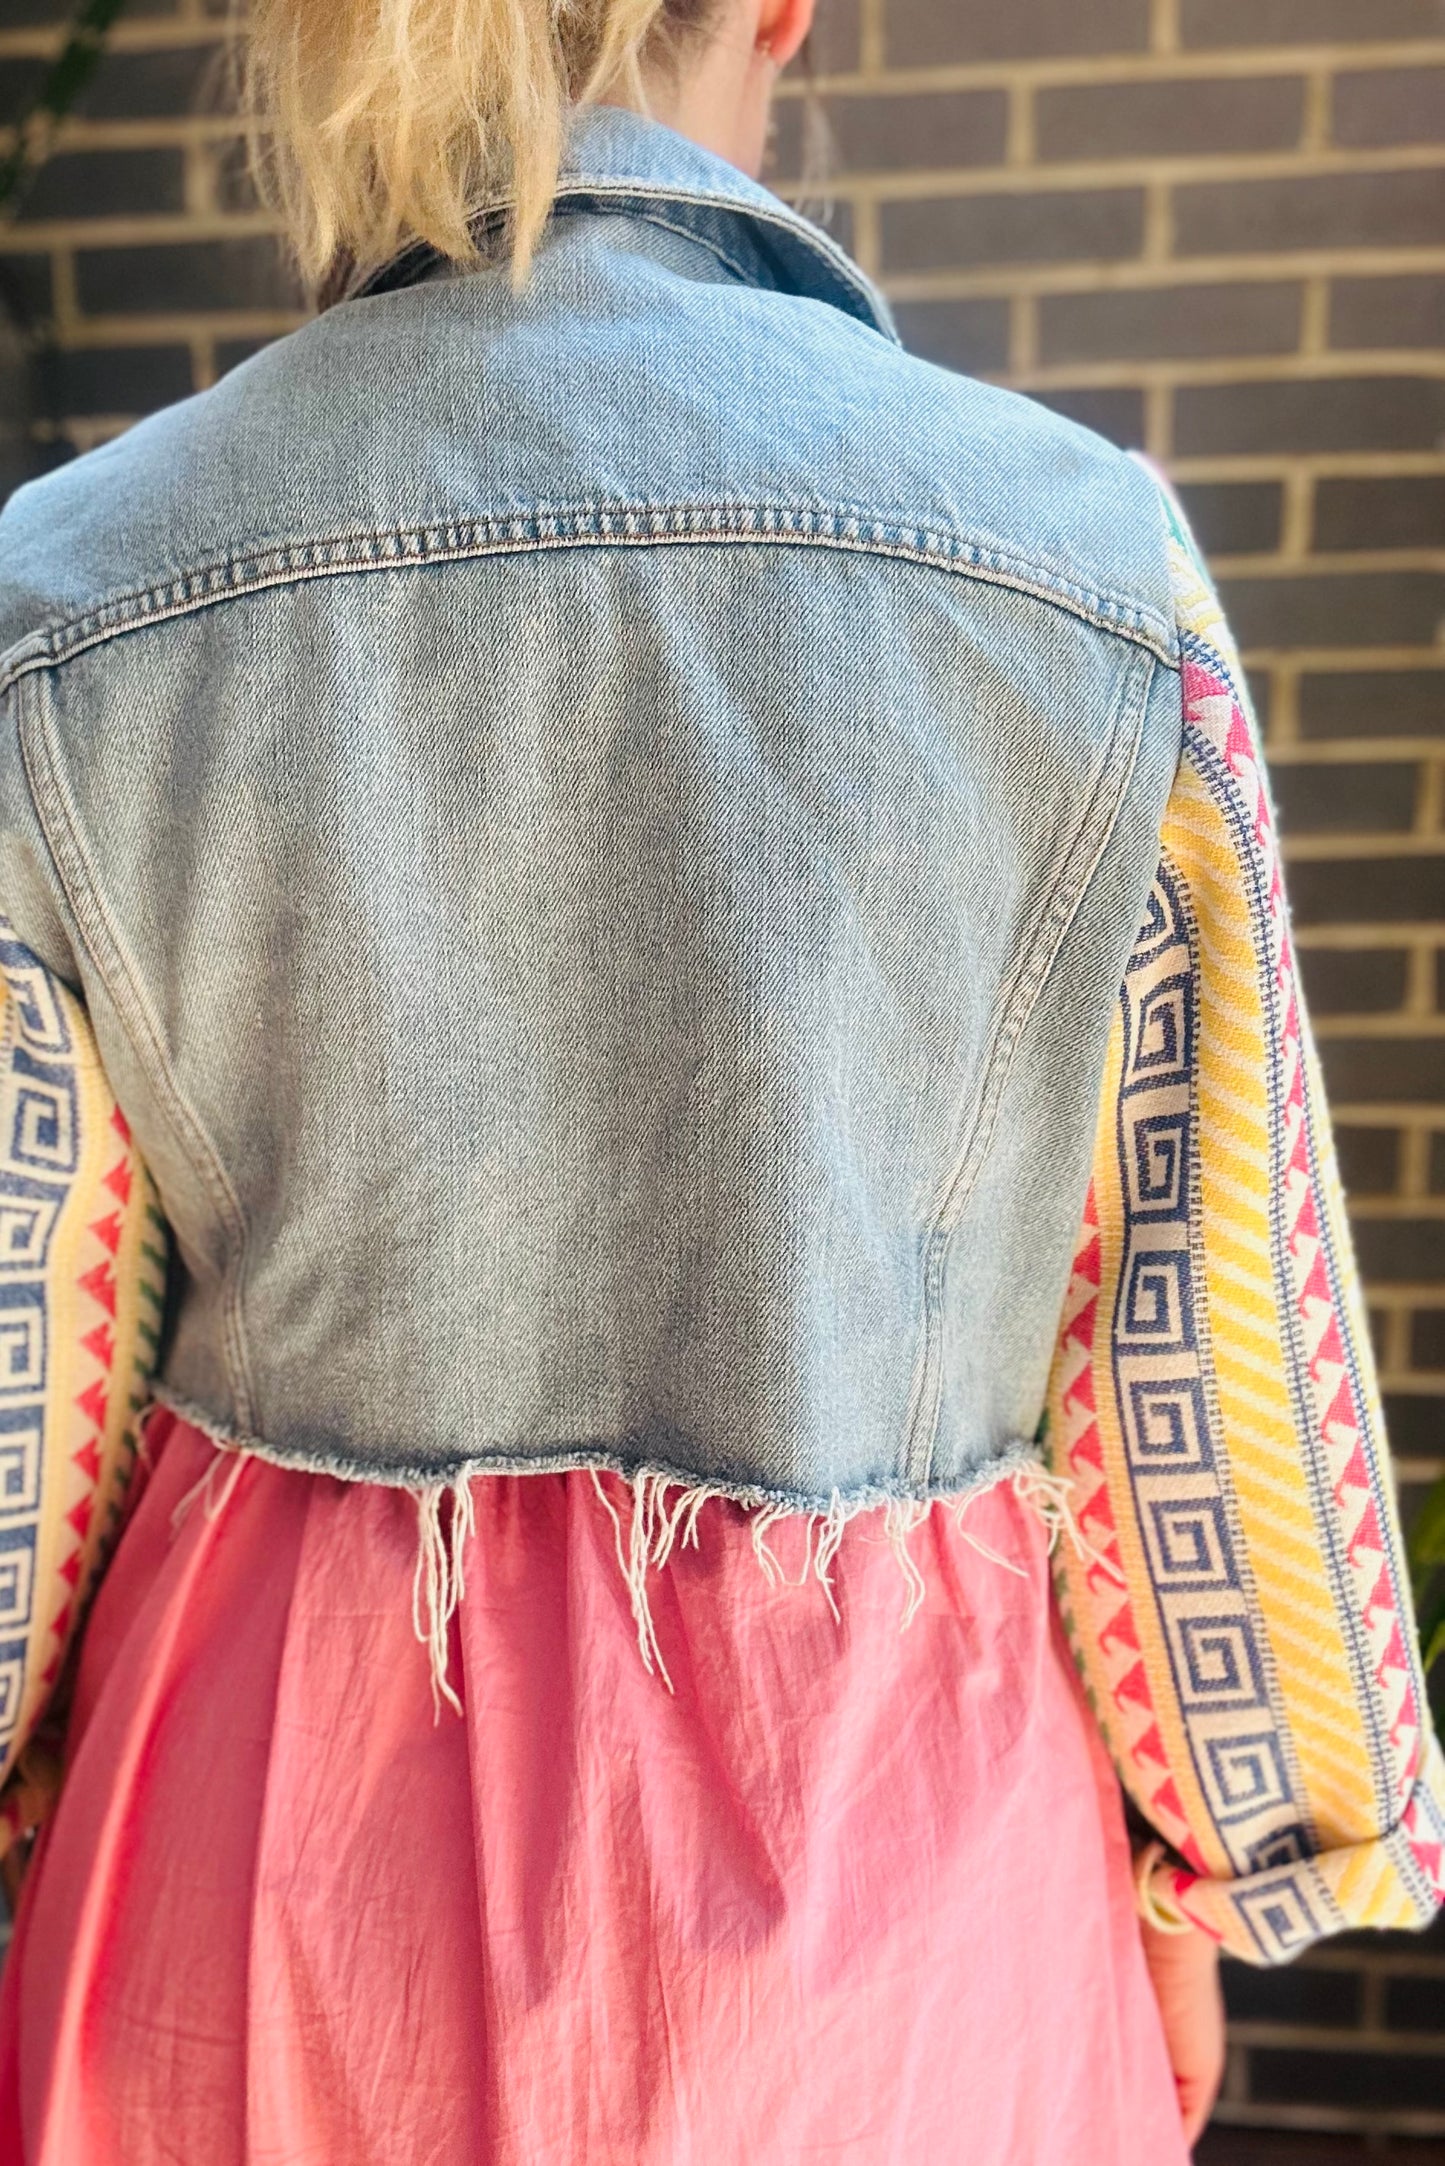 MY collection: Denim repurposed jacket with statement Aztec sleeves